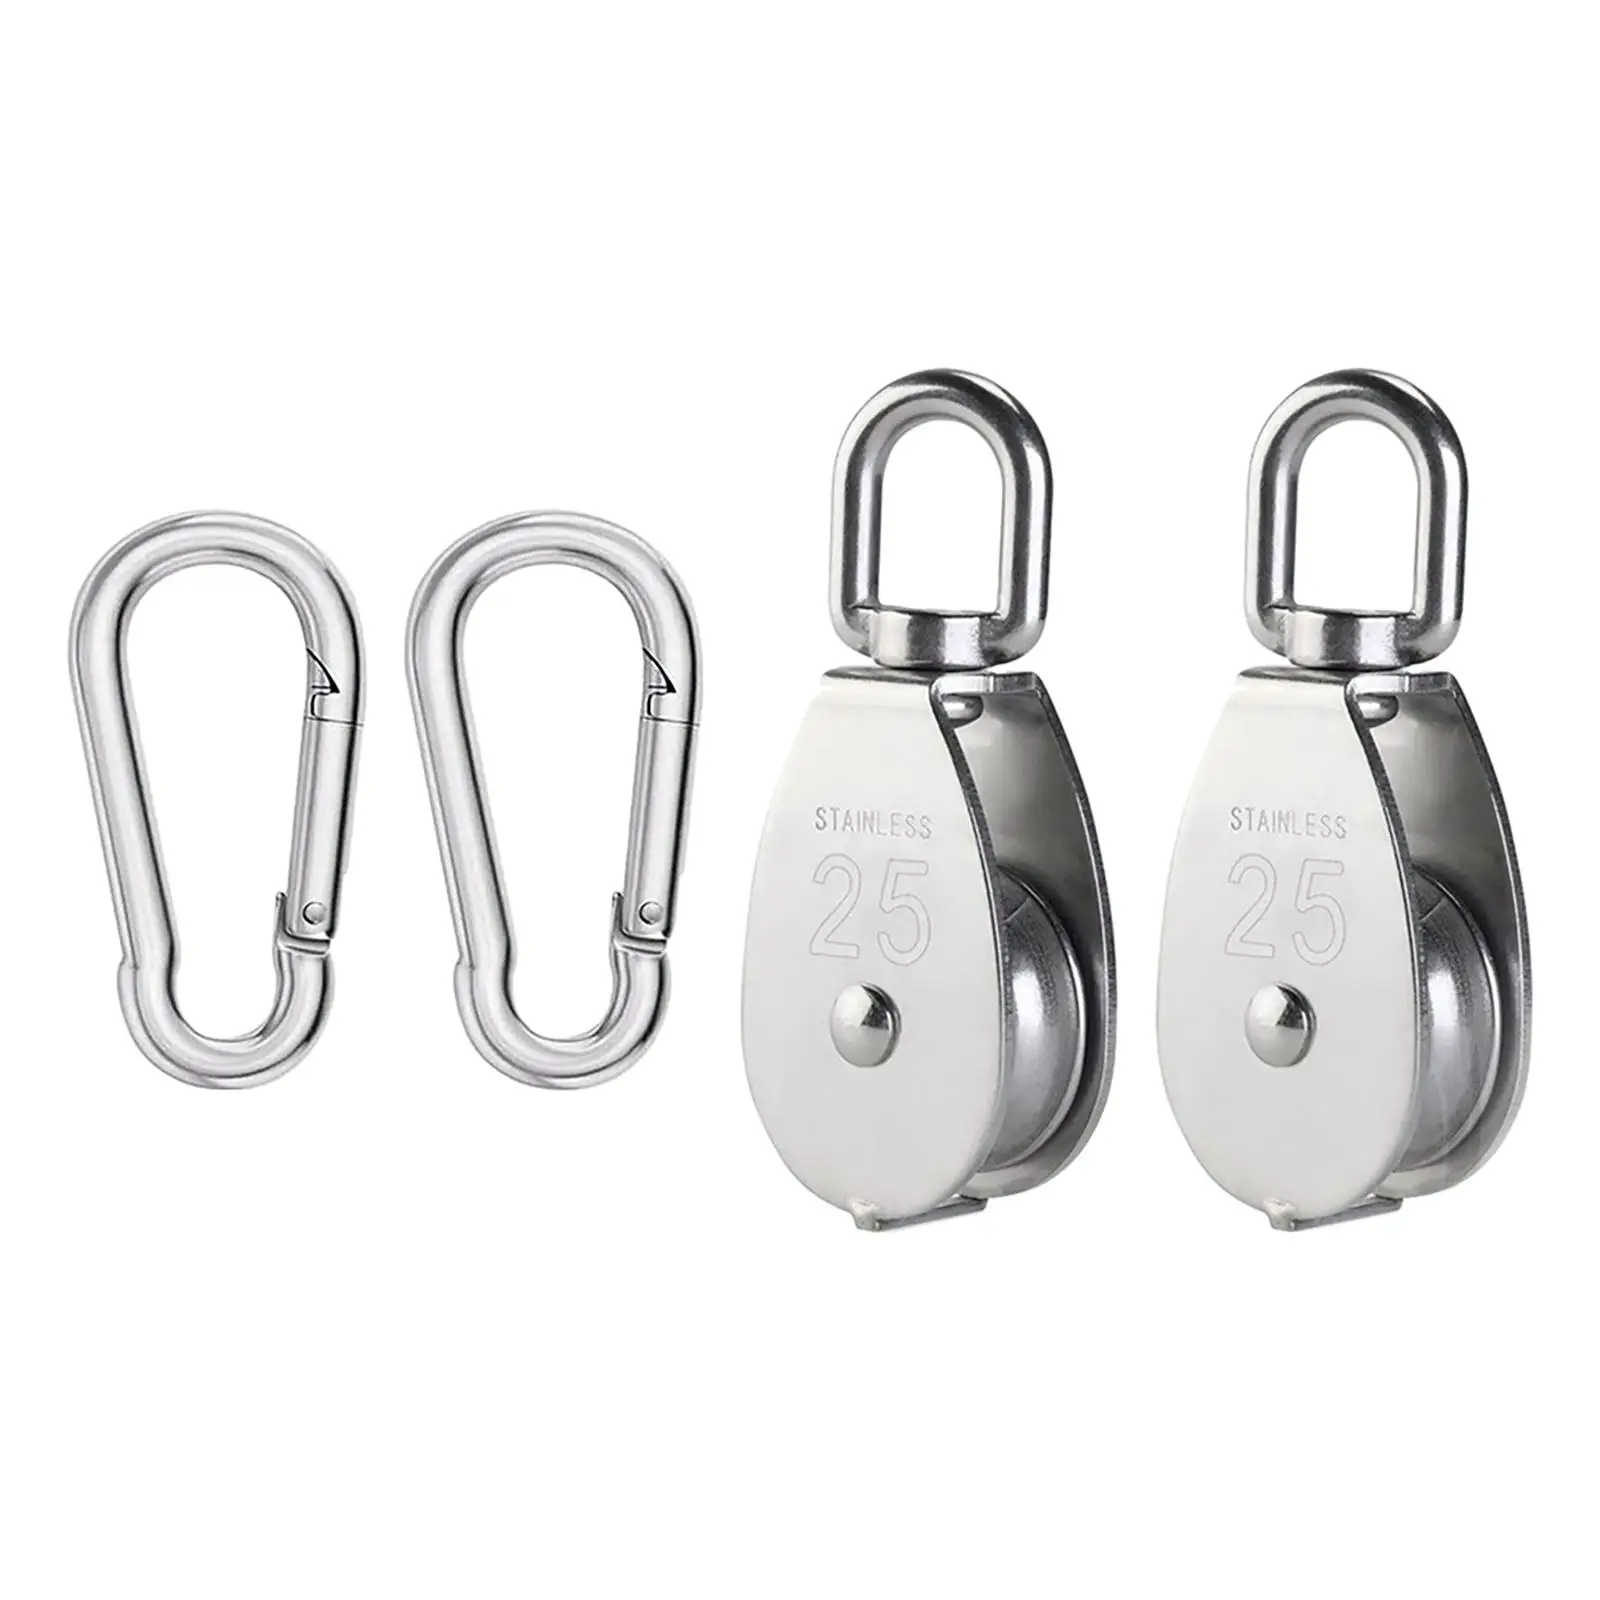 Metal M25 Single Pulley Block with Carabiners Rope Wheel for Cable Wire Rope